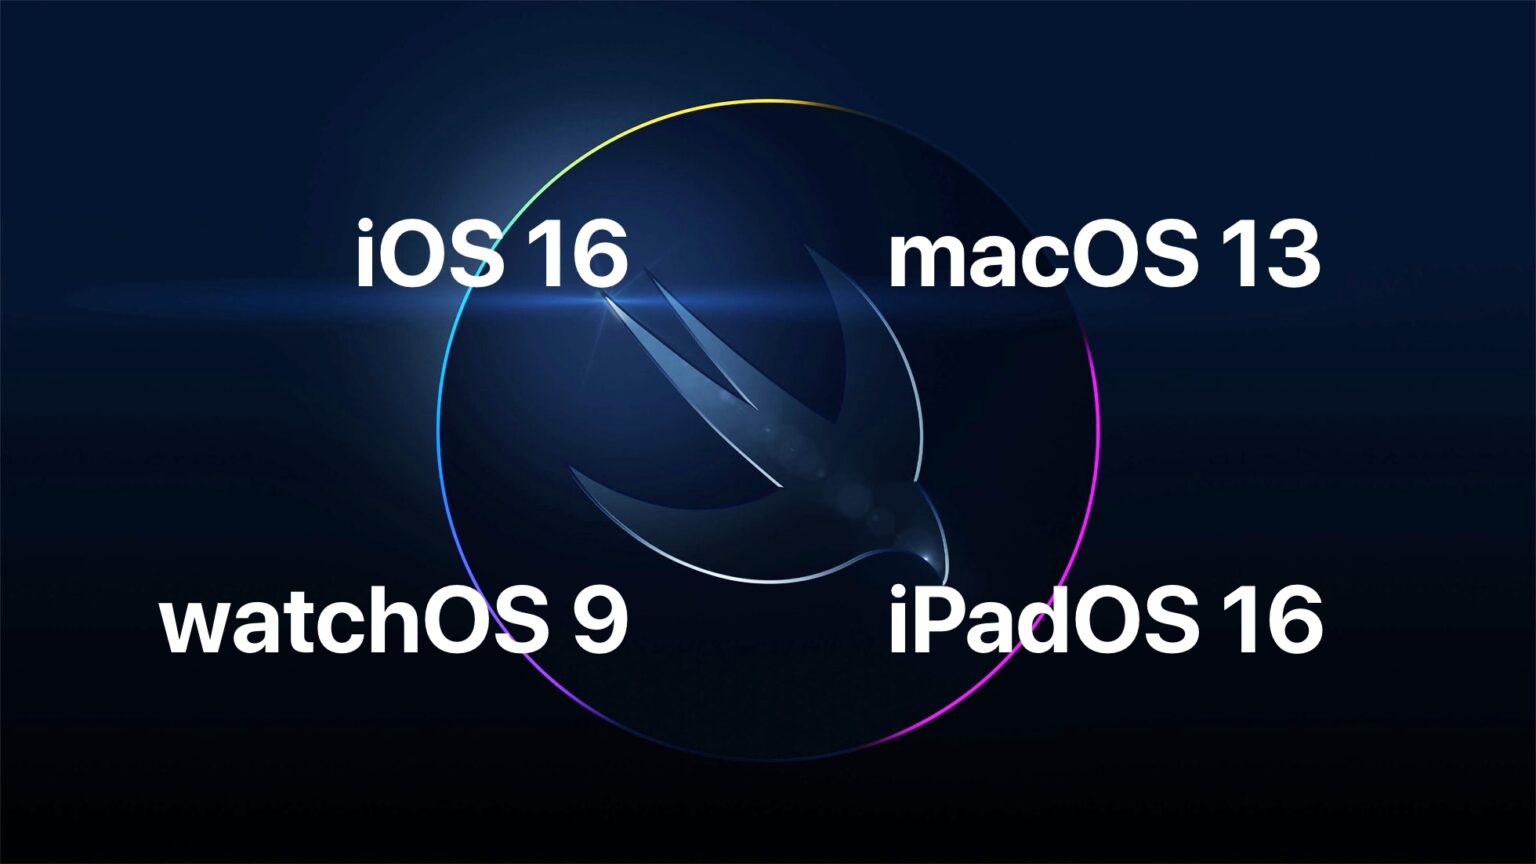 What to expect from iOS 16, macOS 13, iPadOS 16 and watchOS 9 at WWDC22